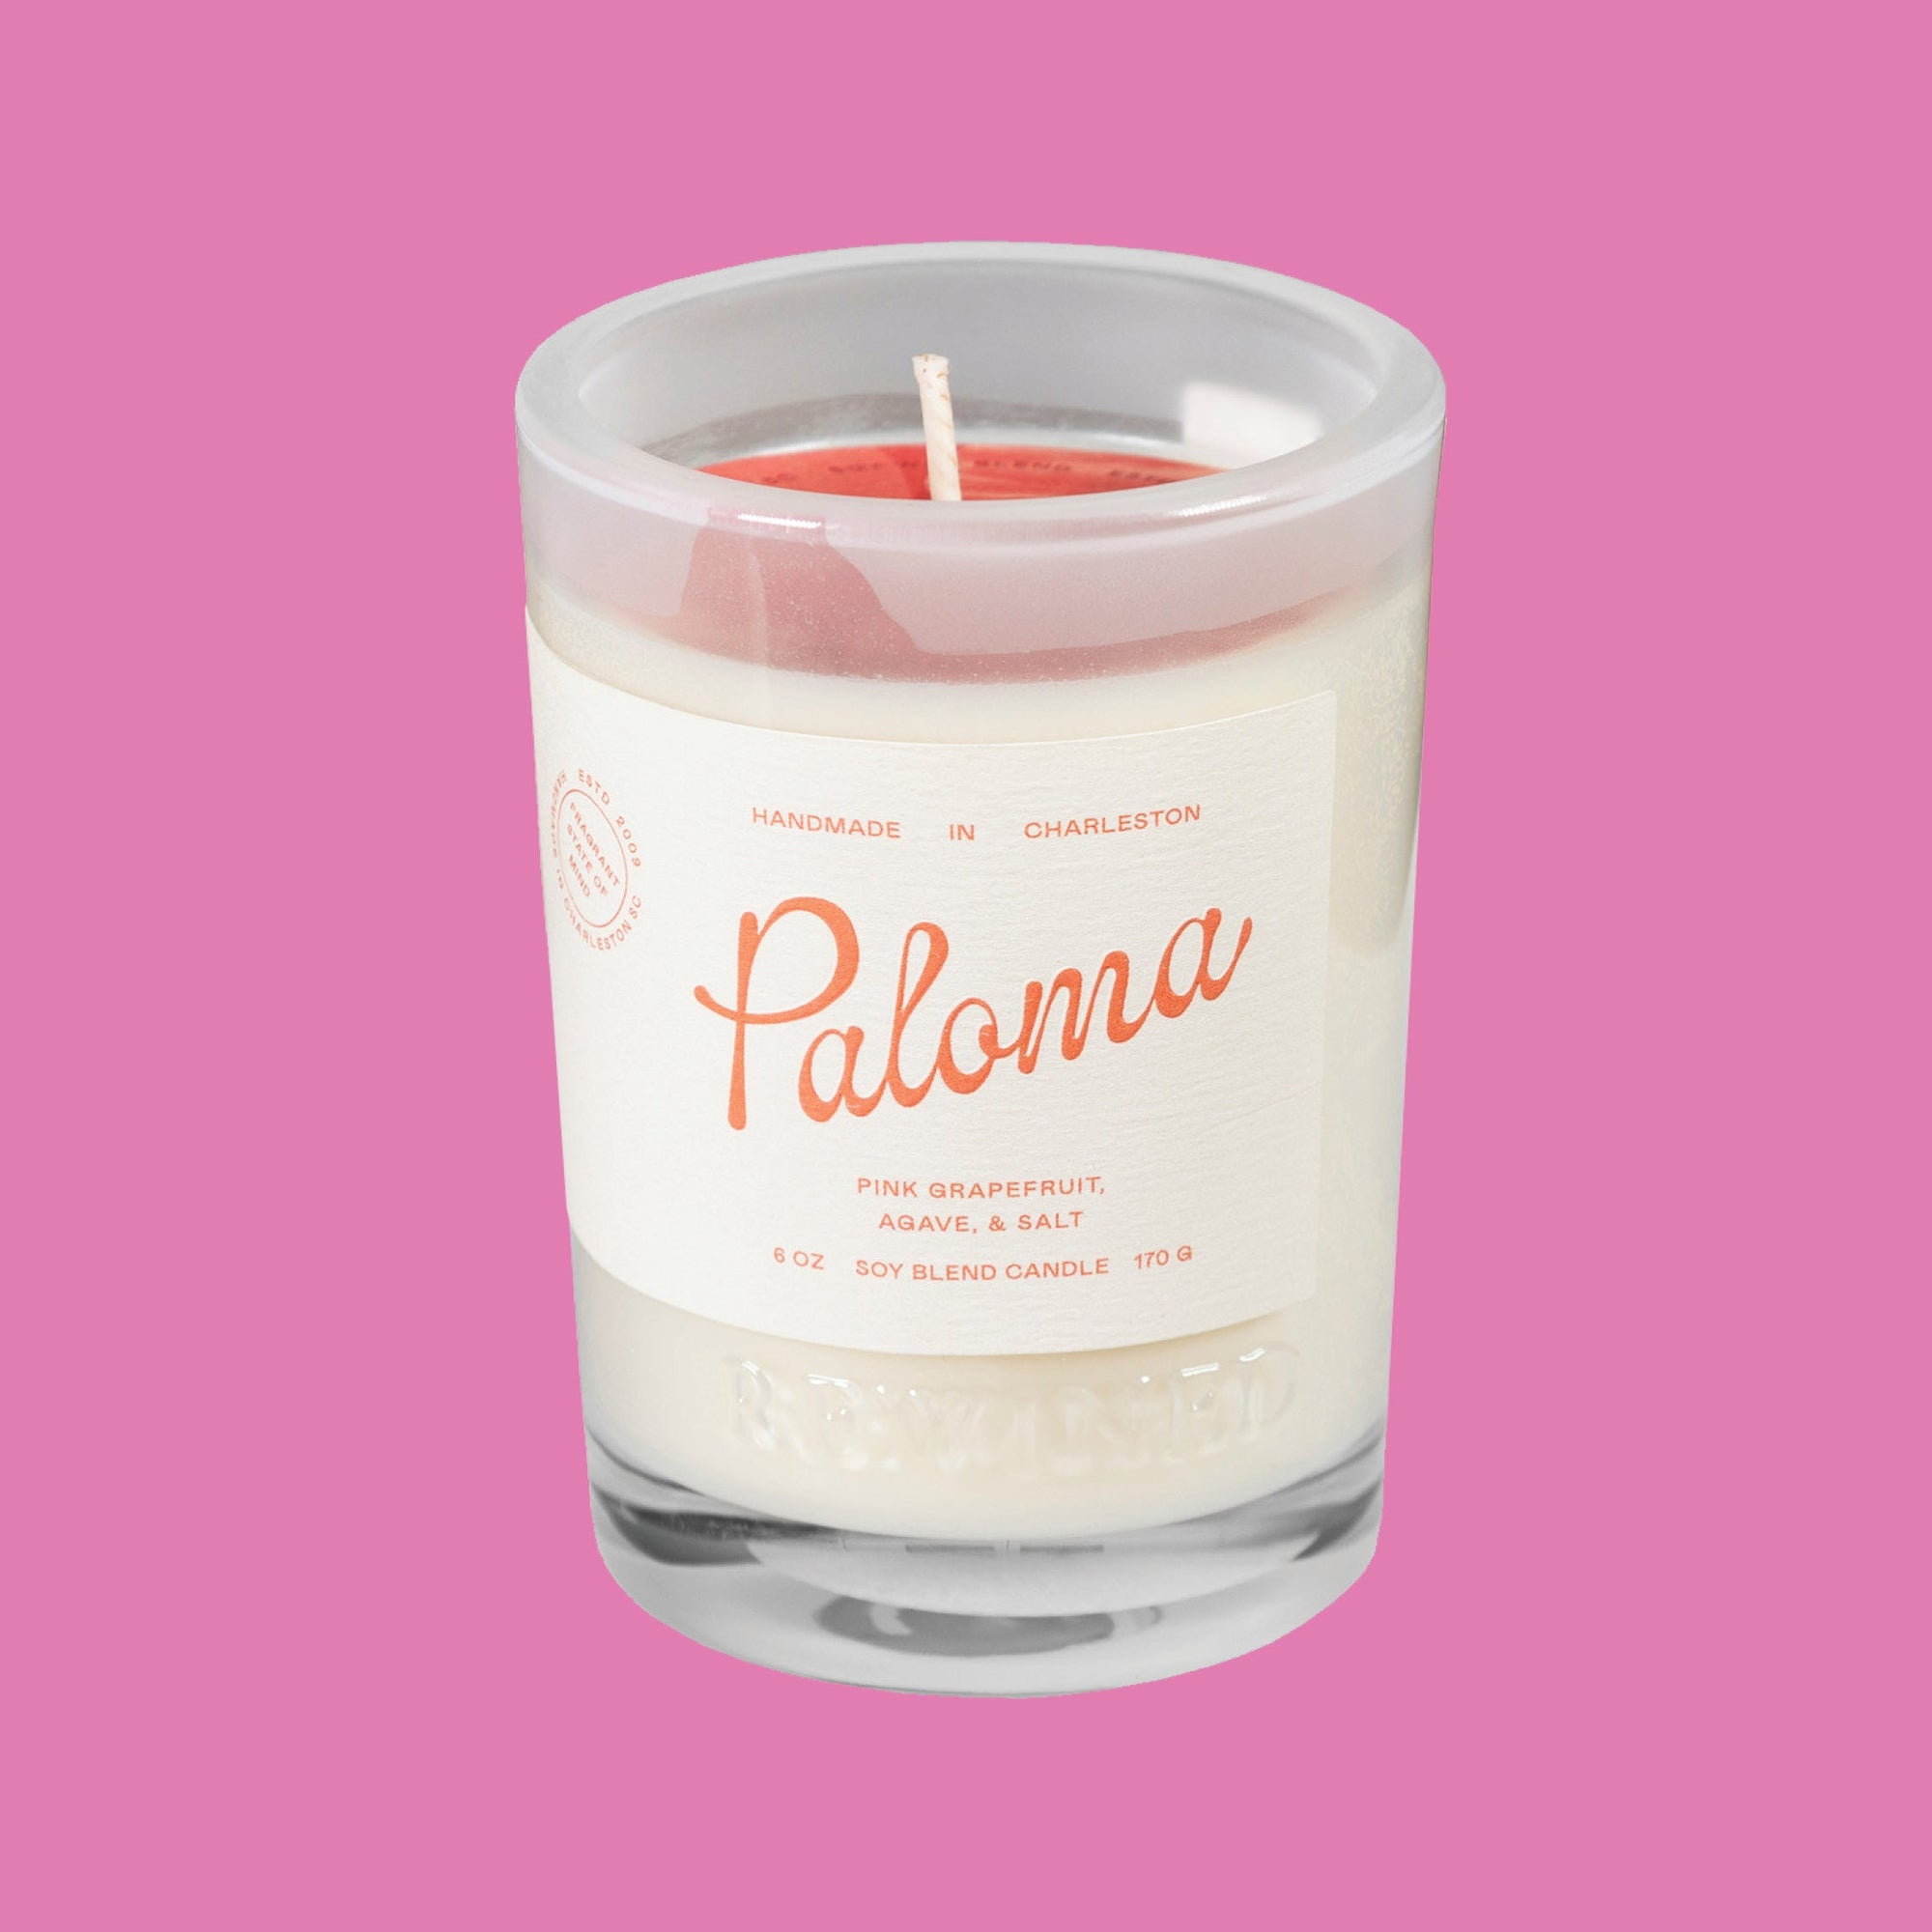 On a raspberry pink background sits a Rewined Sparkling Collection Handmade Paloma Soy Blend Candle. It's scent is pink grapefruit, agave, and salt. It has a cream label with coral text.